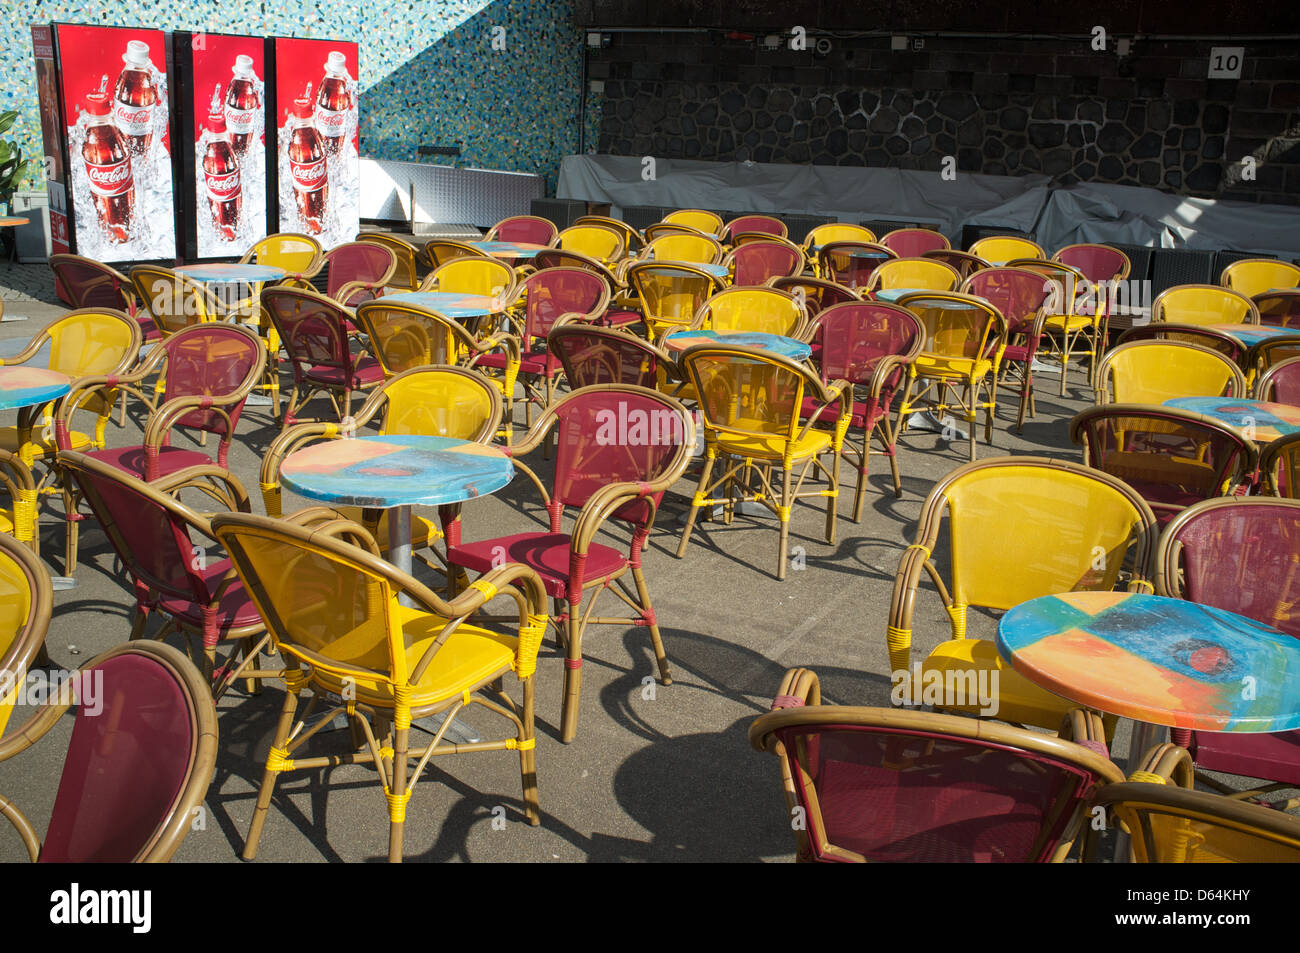 Empty seats at a cafe Stock Photo